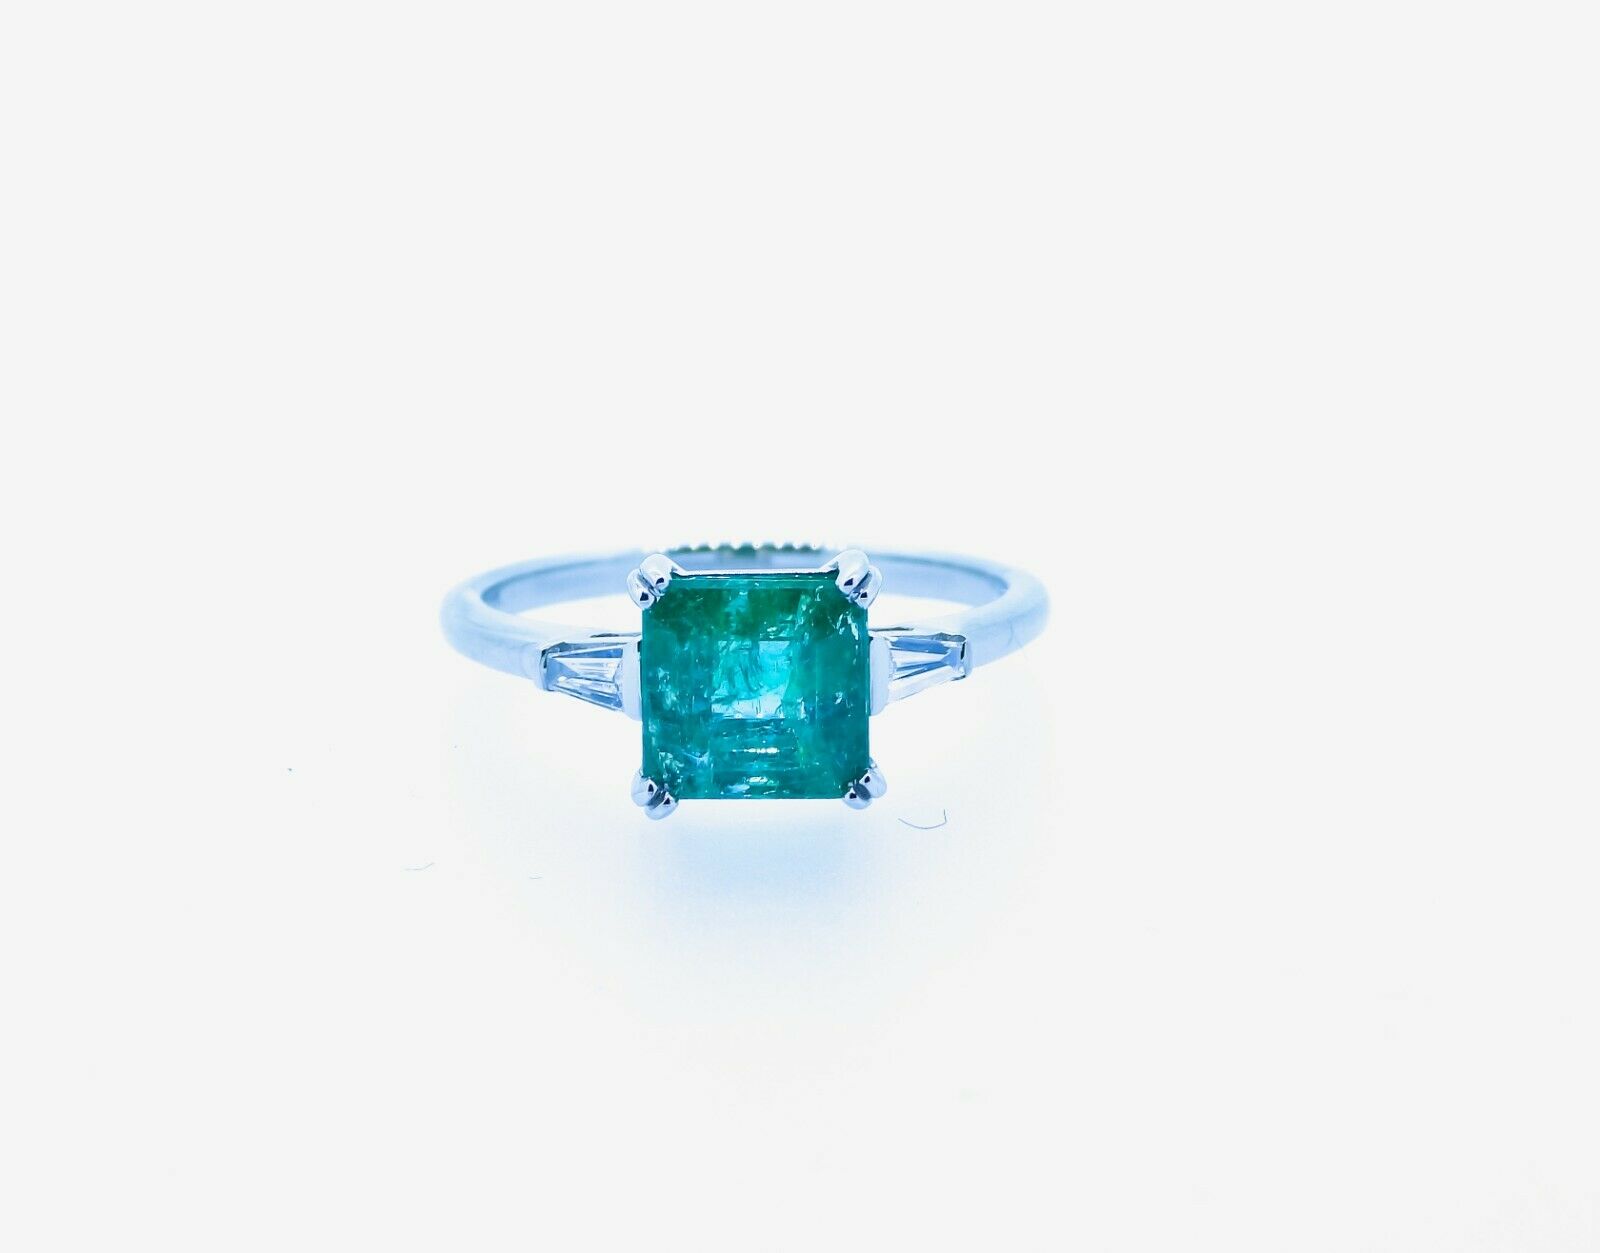 Certified 2.37 ct Natural Emerald and Diamonds 18K White Gold Ring - Image 7 of 8